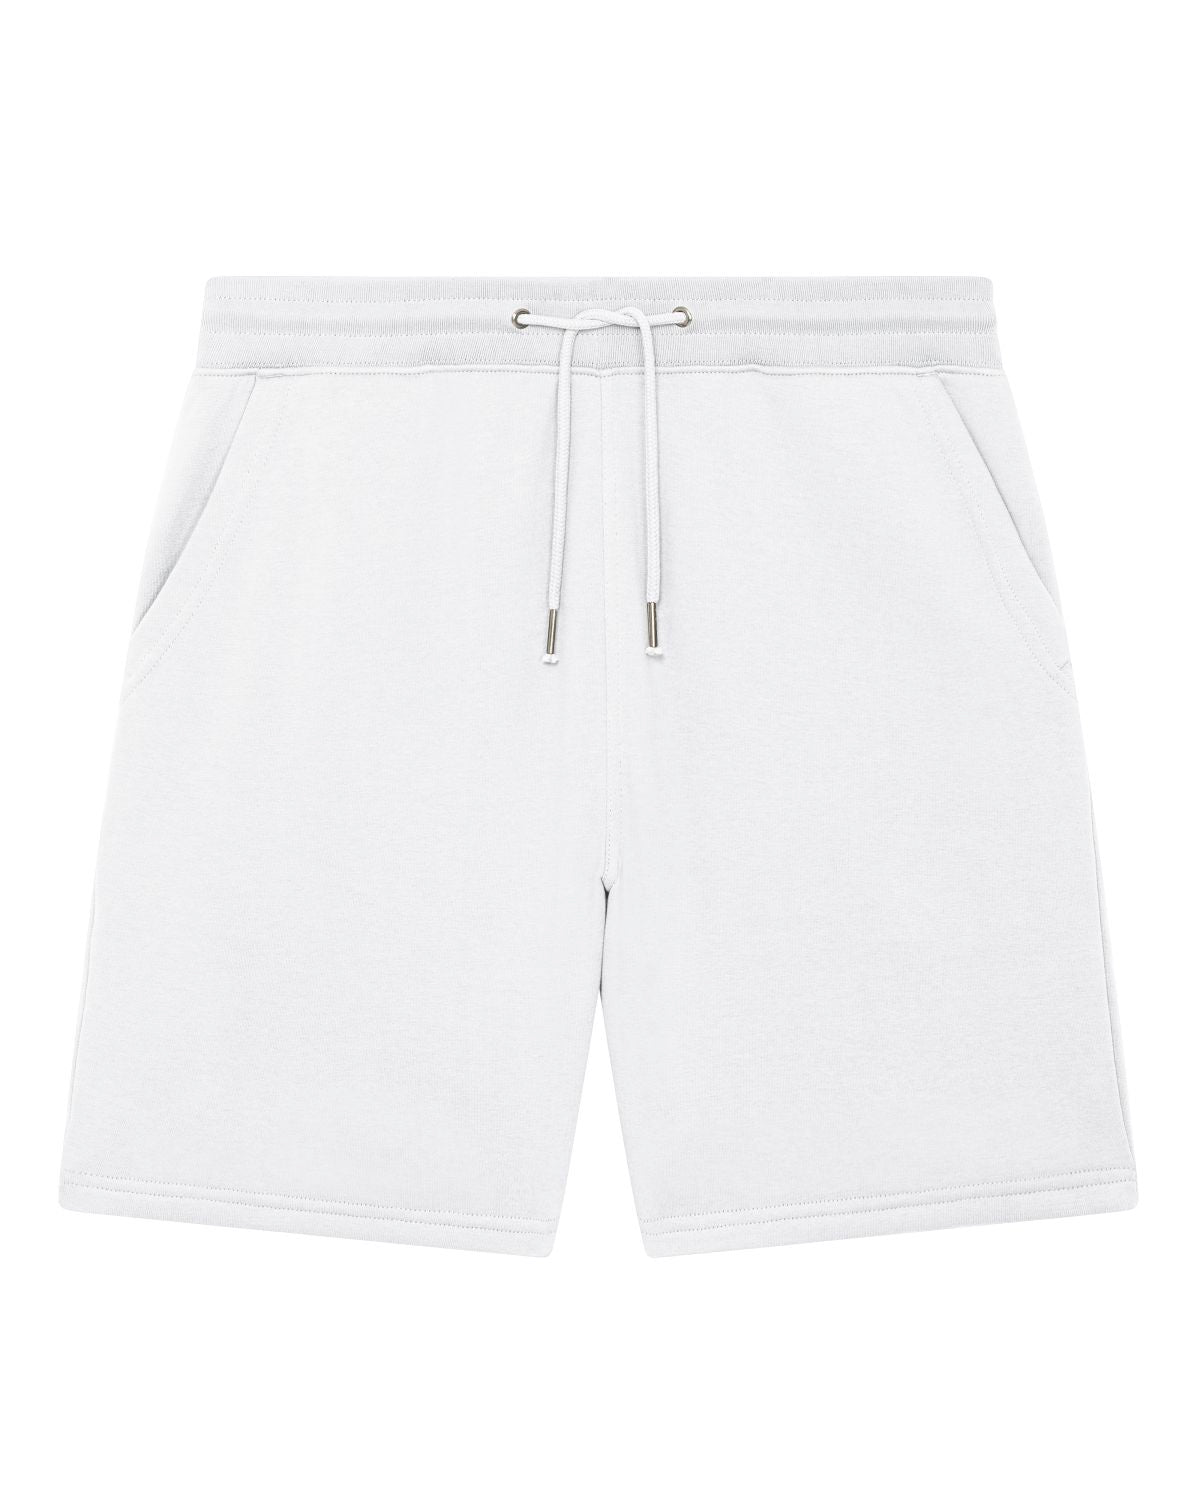 Customize your own sustainable Shorts made of 85% GOTS-certified organic cotton